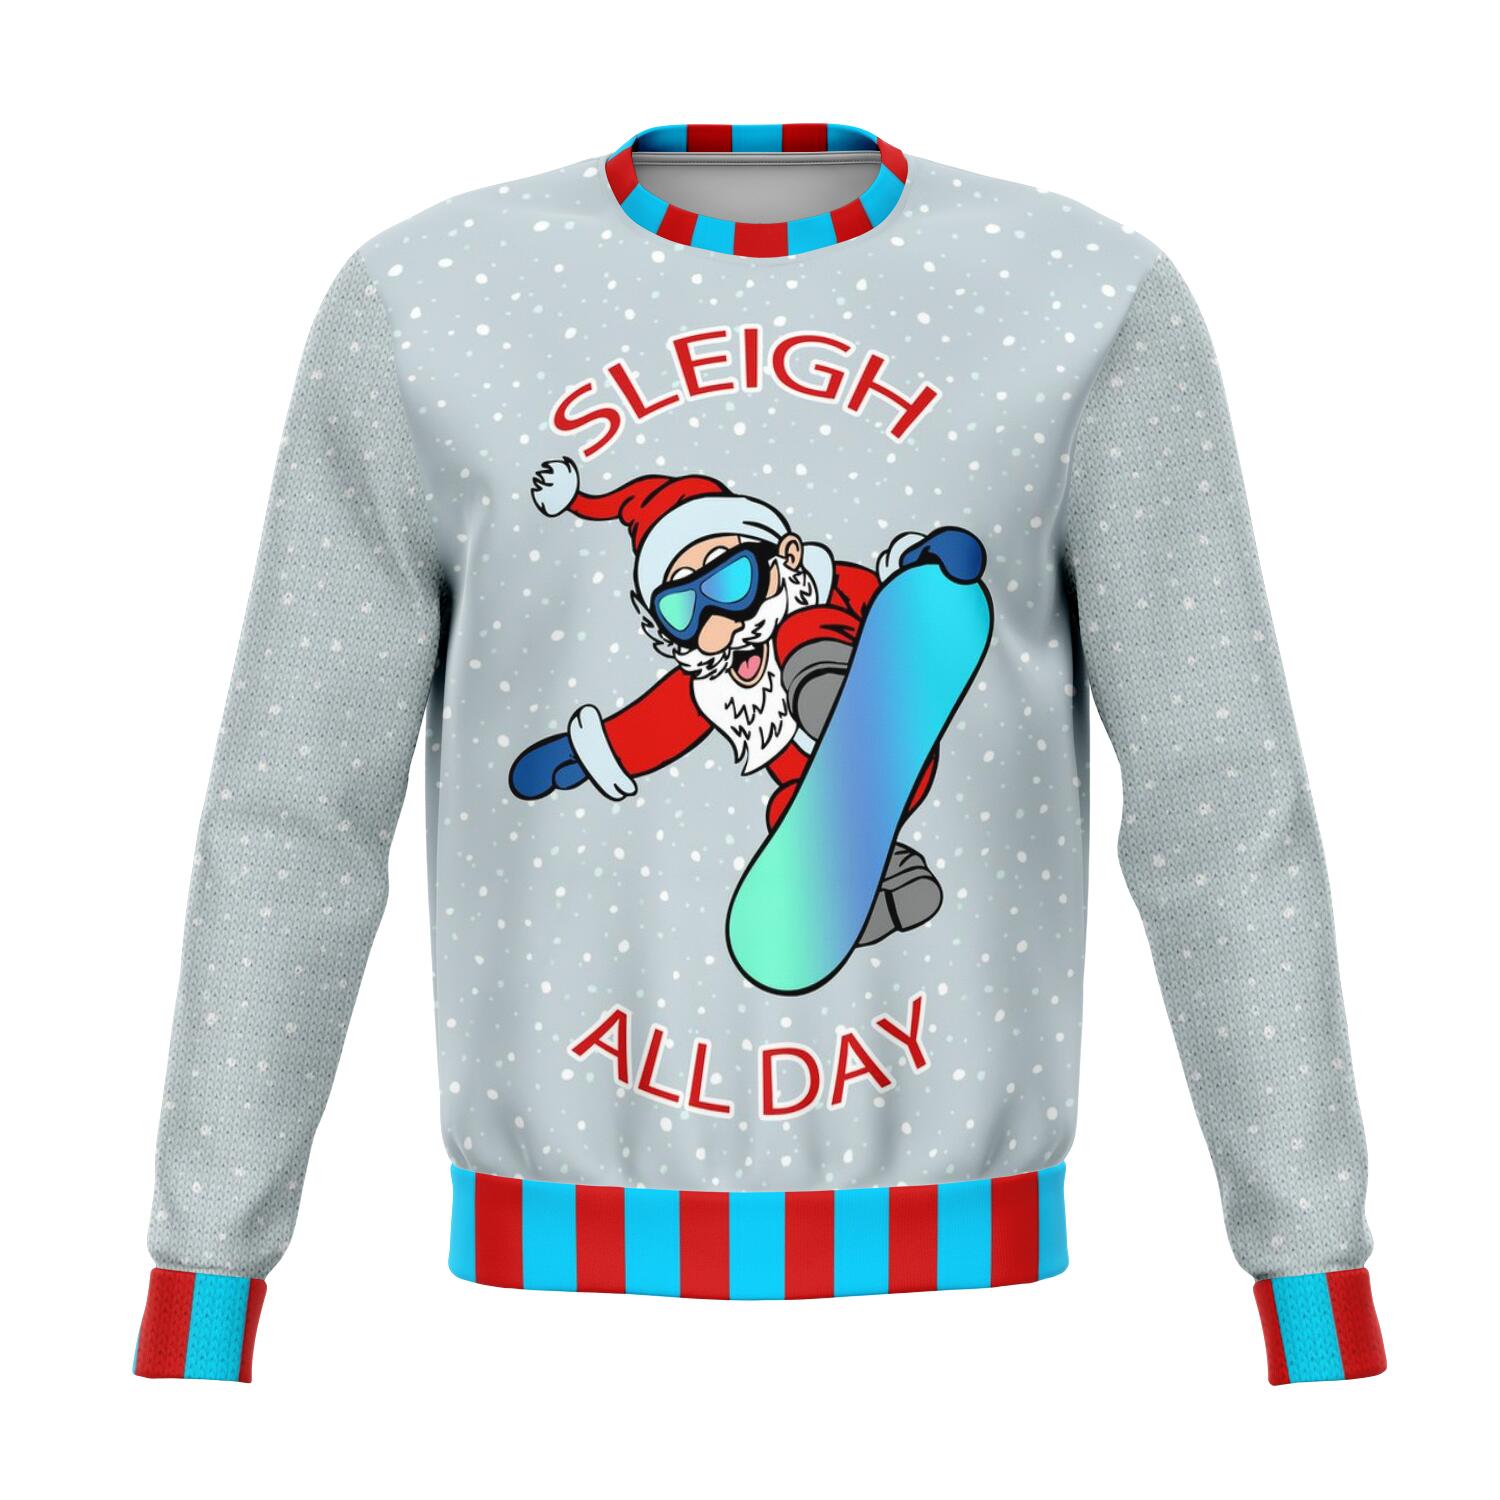 Sleigh All Day Snowboard Ugly Christmas Sweater Order By December 5 - Powderaddicts